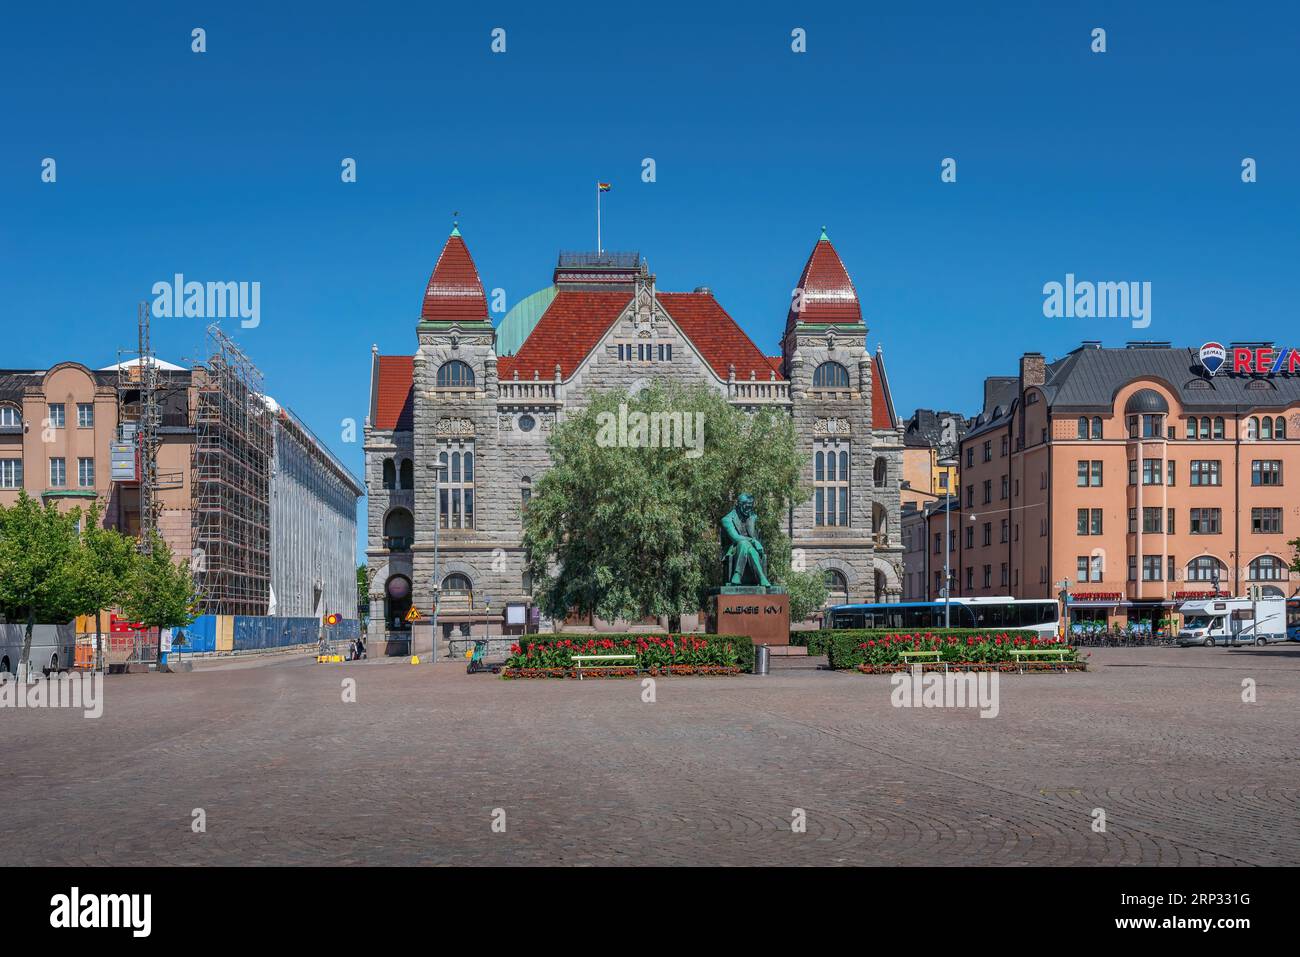 Railway Square with Finnish National Theatre and Aleksis Kivi Statue - Helsinki, Finland Stock Photo